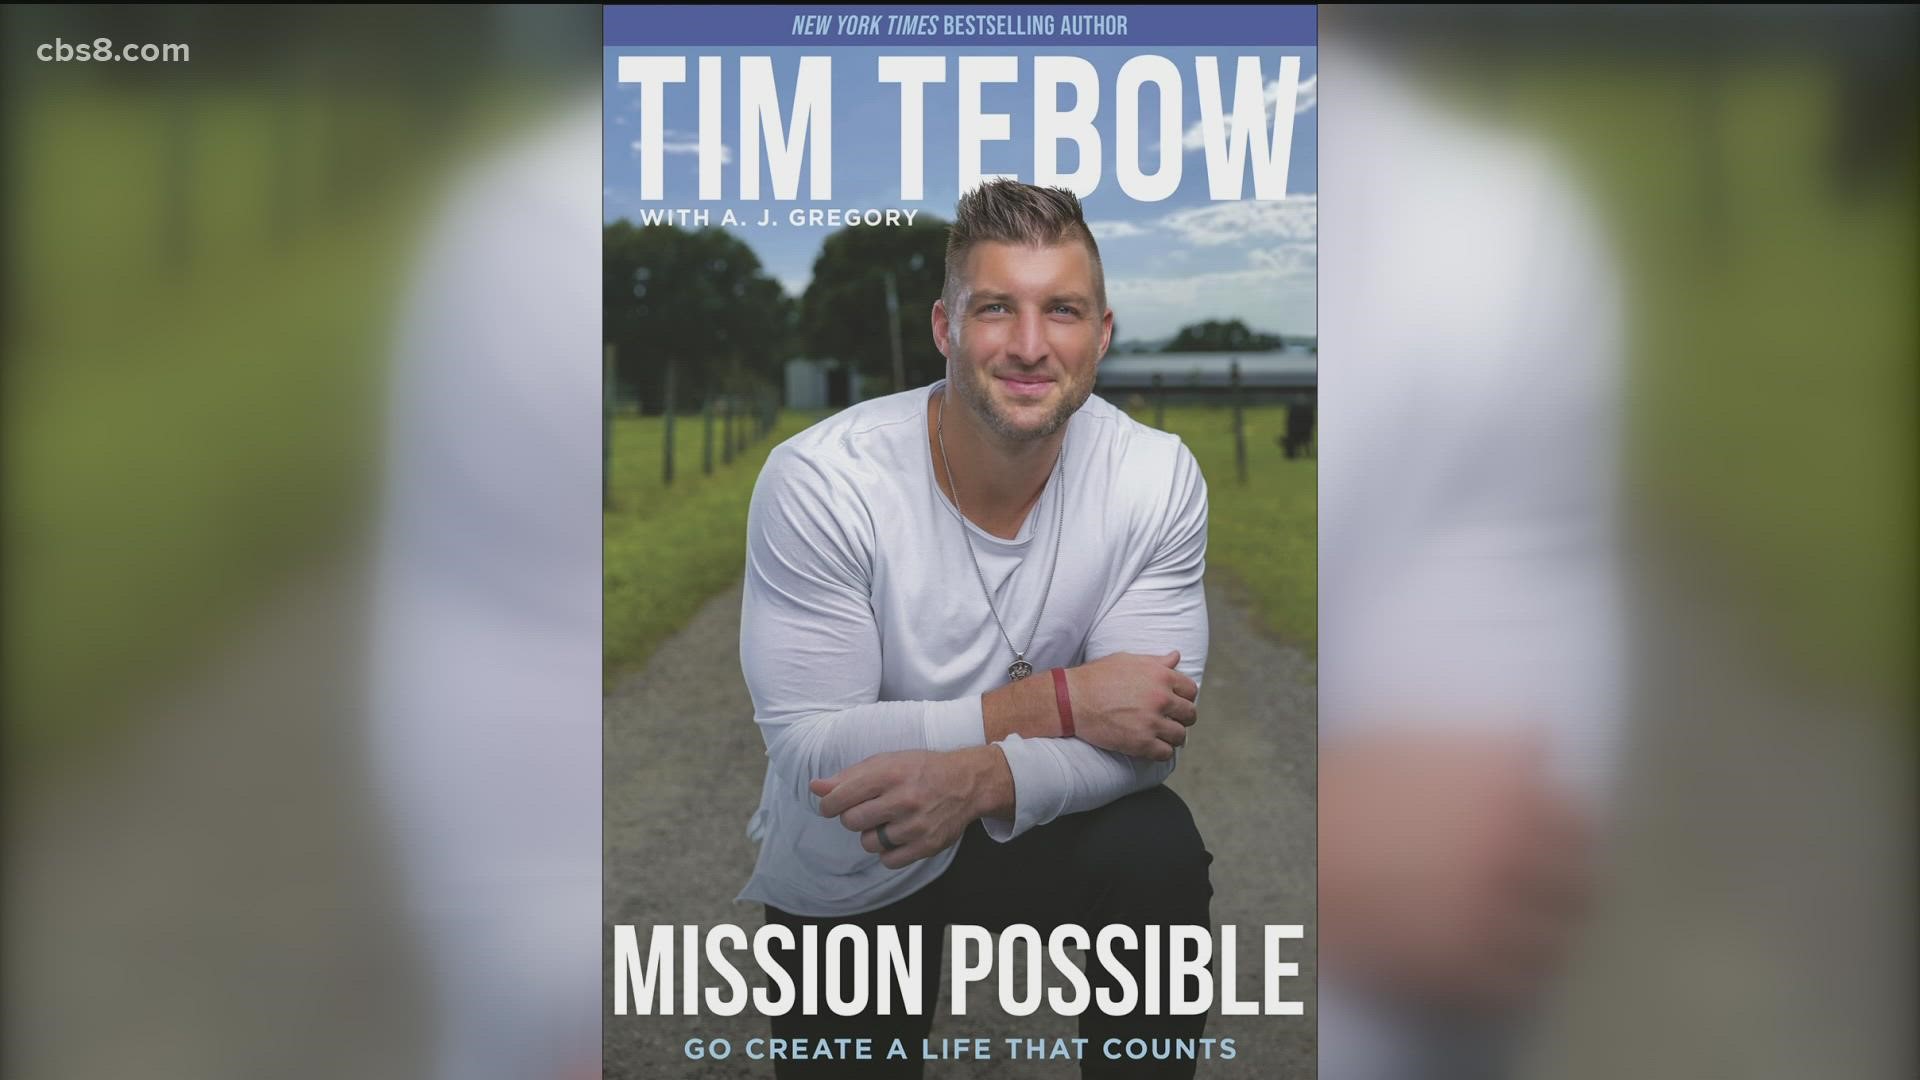 From football, to his global foundation work across 74 countries, Tim Tebow has a message for you, and it's in his new book.